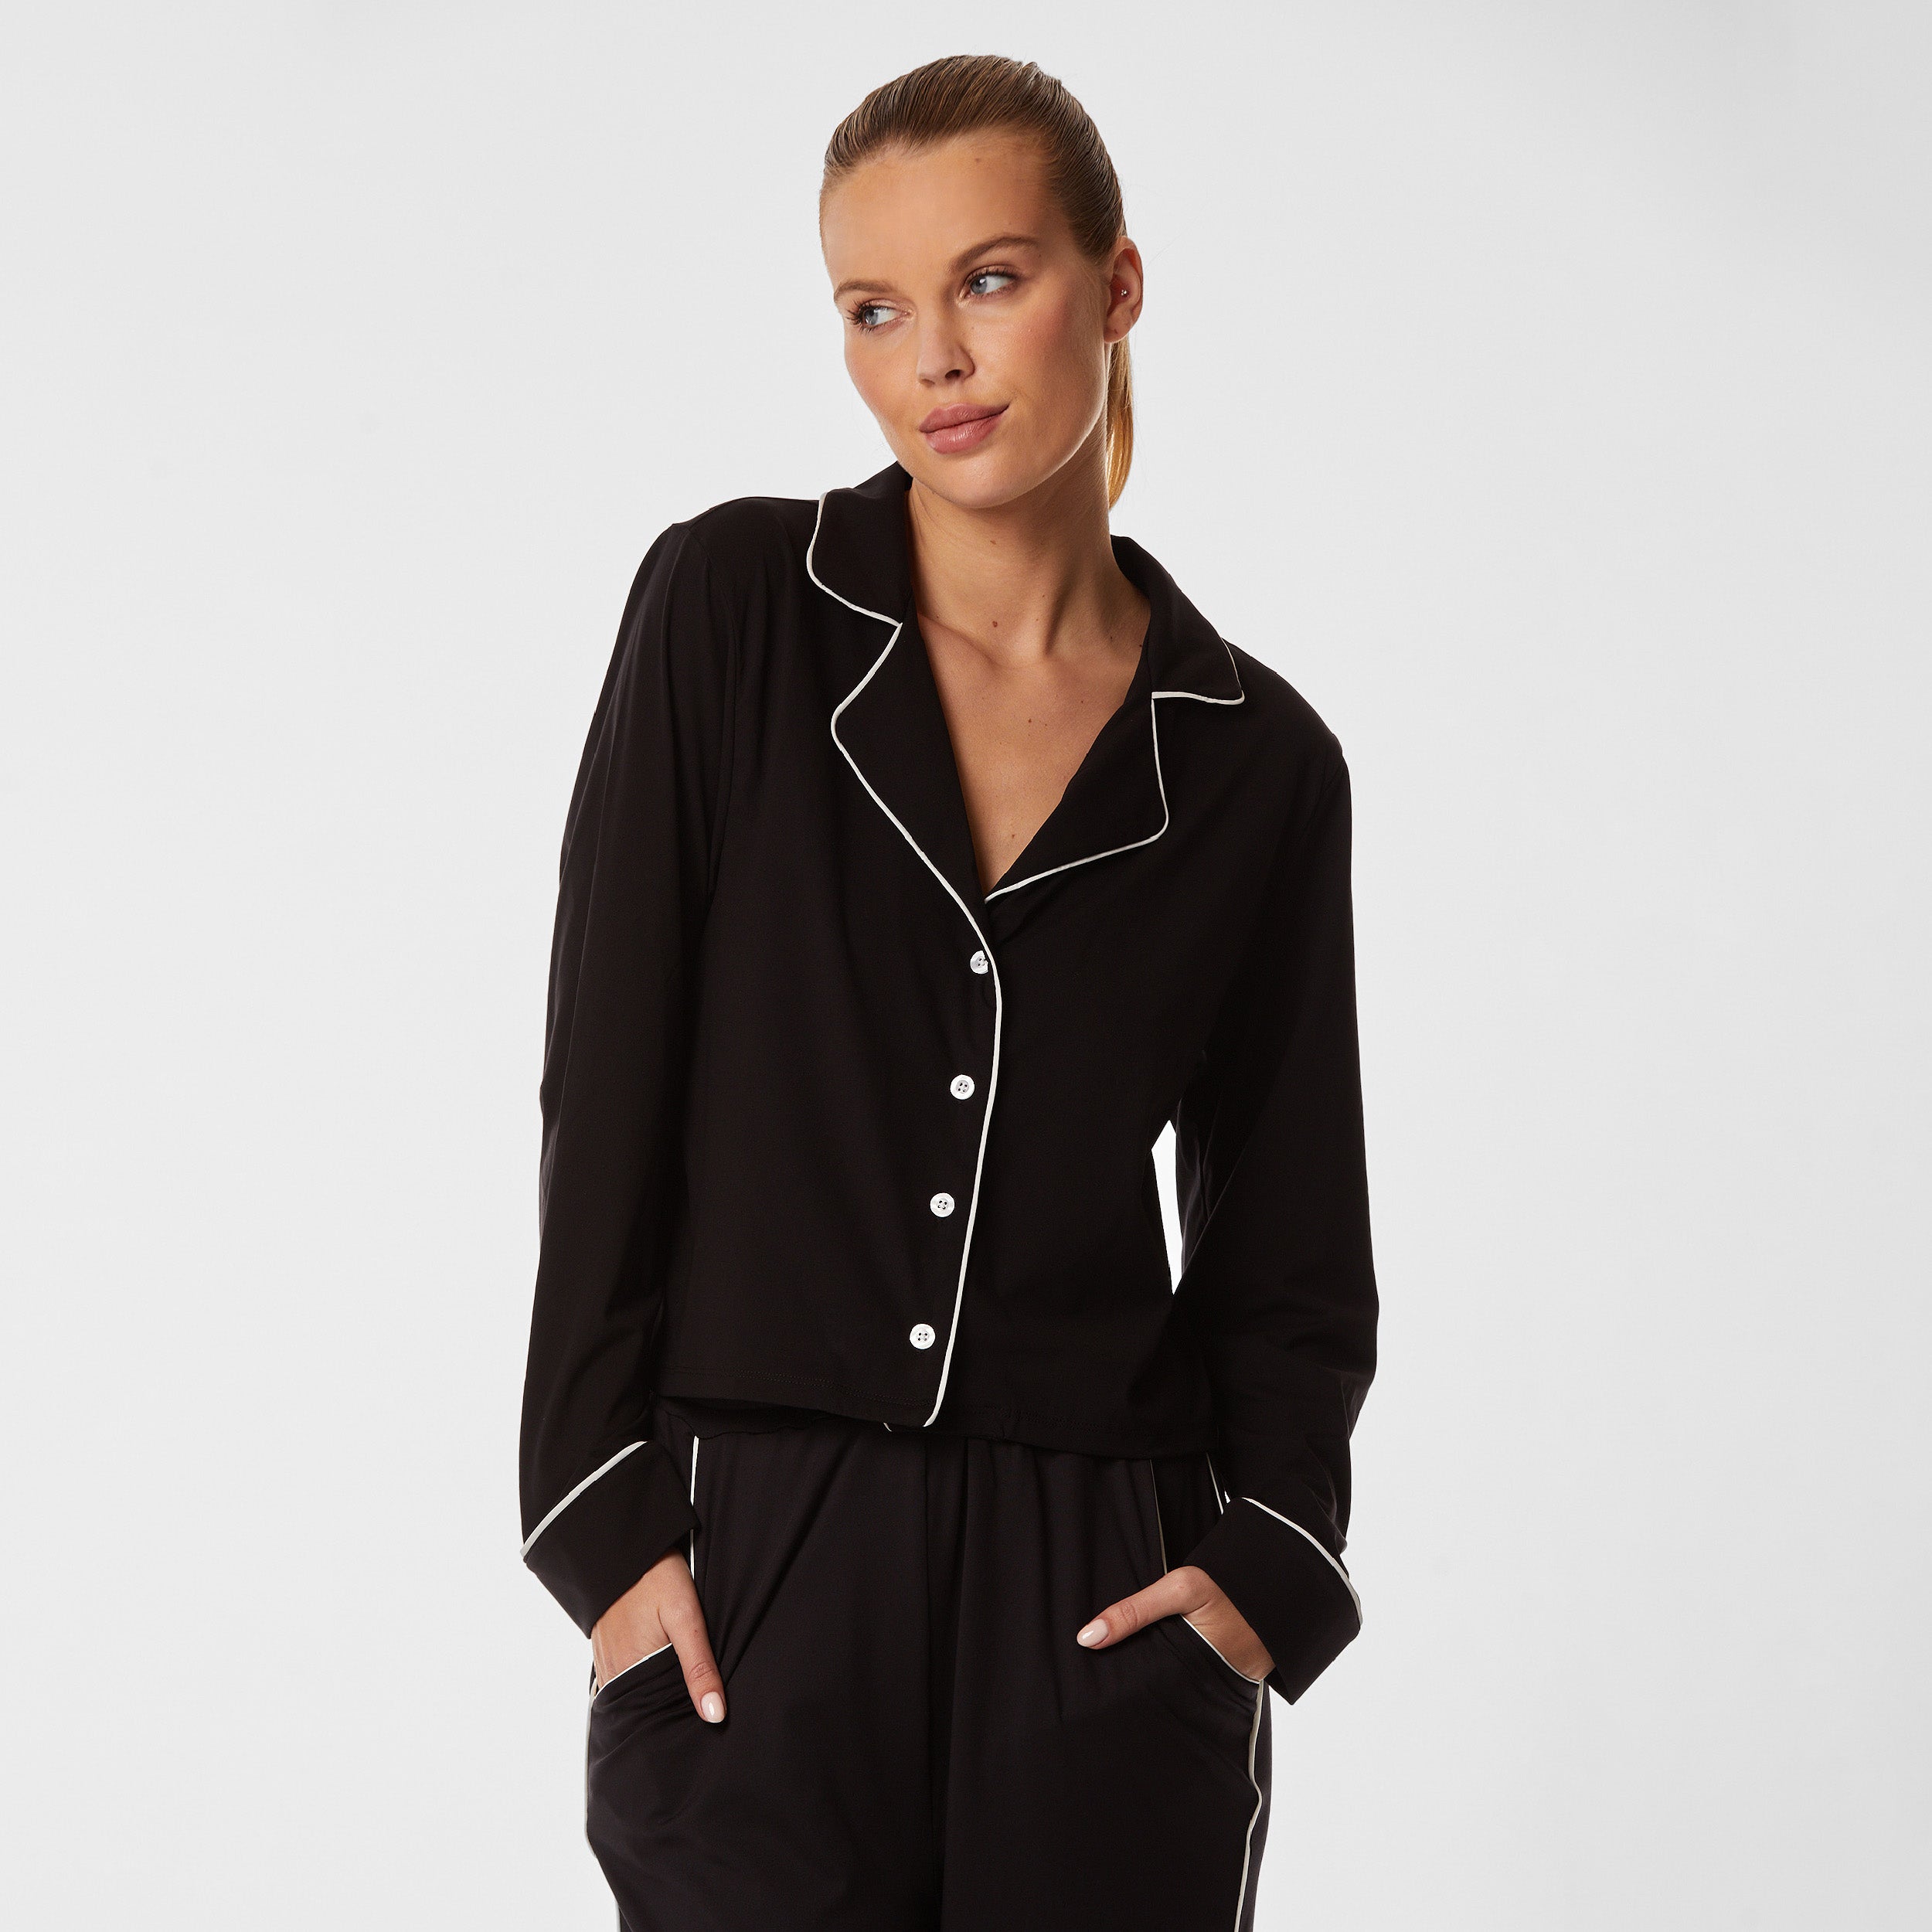 Front view of woman wearing soft Black Pajama shirt with white piping detail and white buttons.